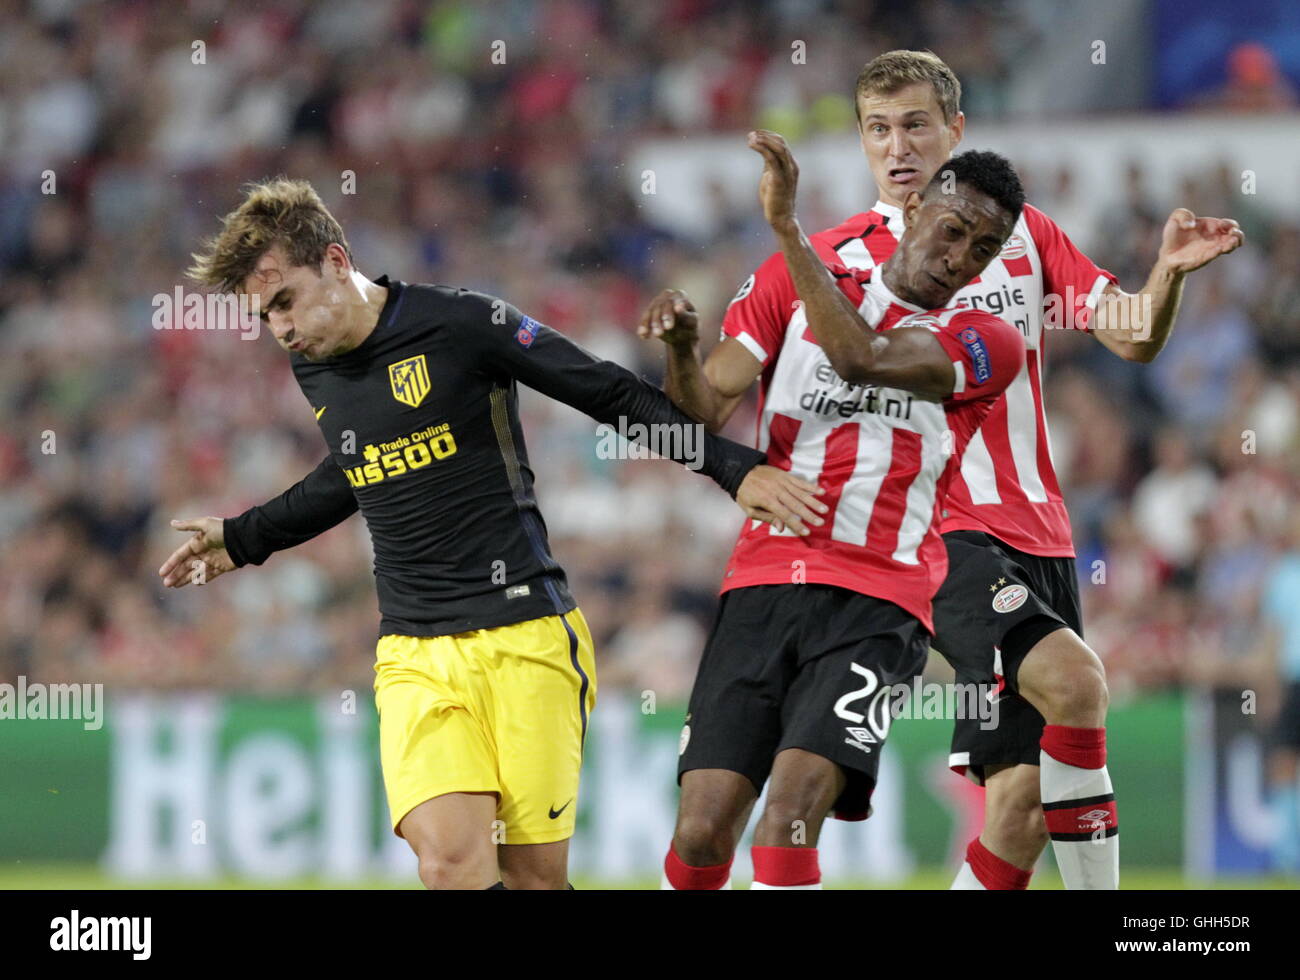 13/09 / 2016.Philip Stadion, Eindhoven, low UEFA Champions League Football. PSV  Eindhoven vs Atlético Madrid Antoine Griezmann in action Stock Photo - Alamy